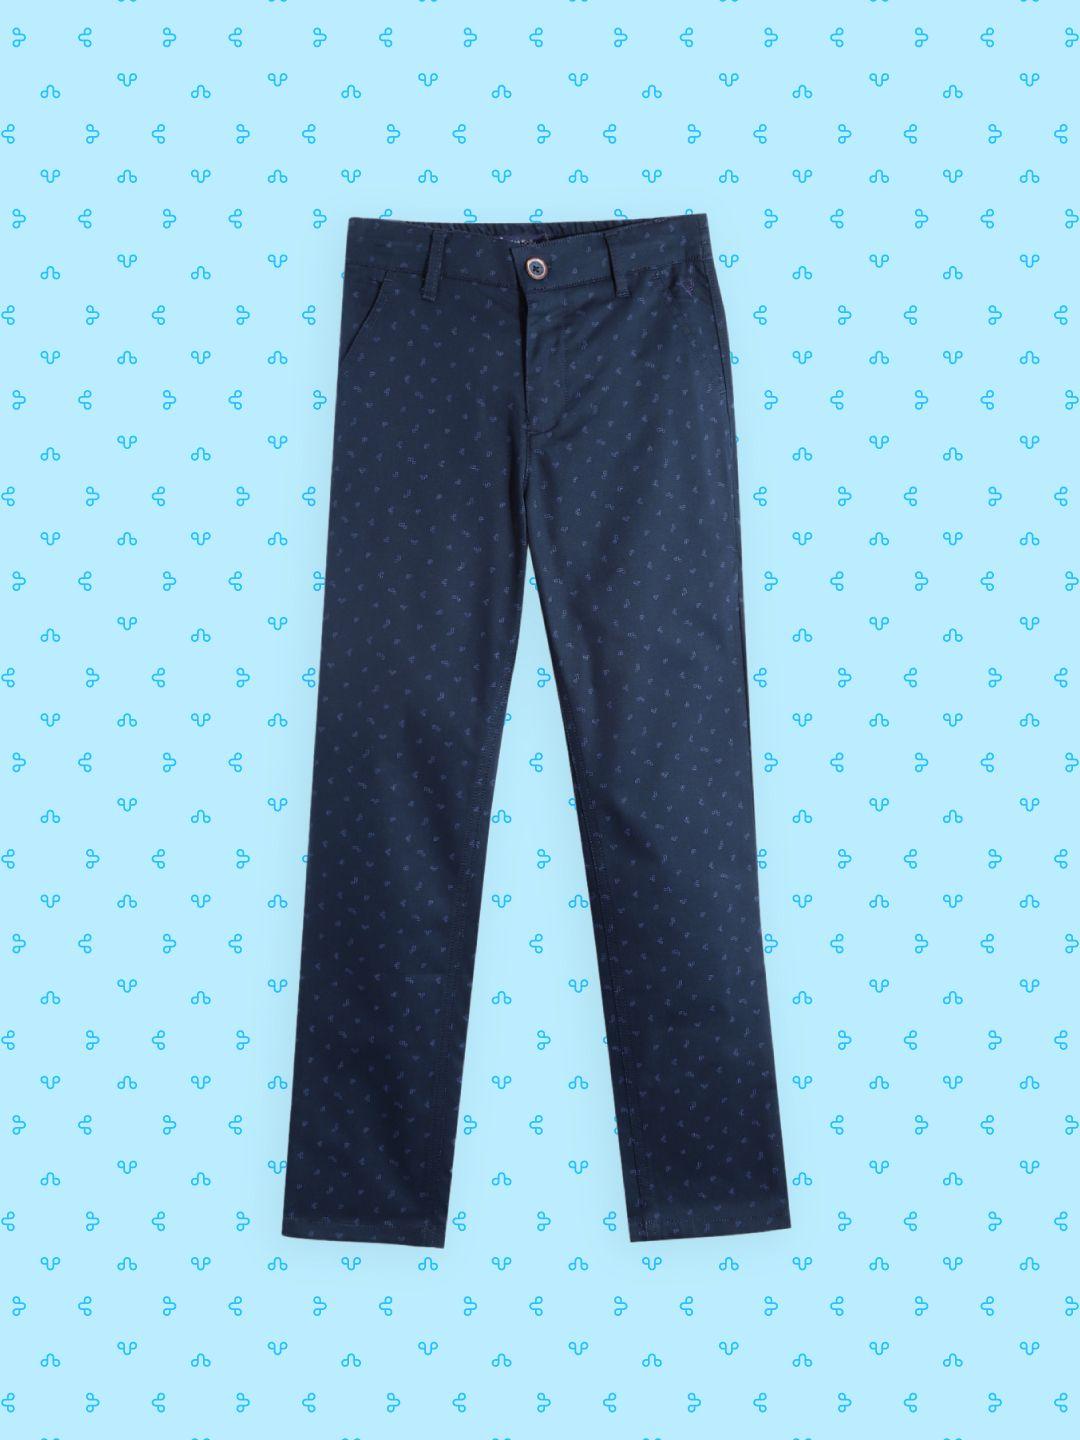 allen-solly-junior-boys-navy-blue-printed-chino-trousers